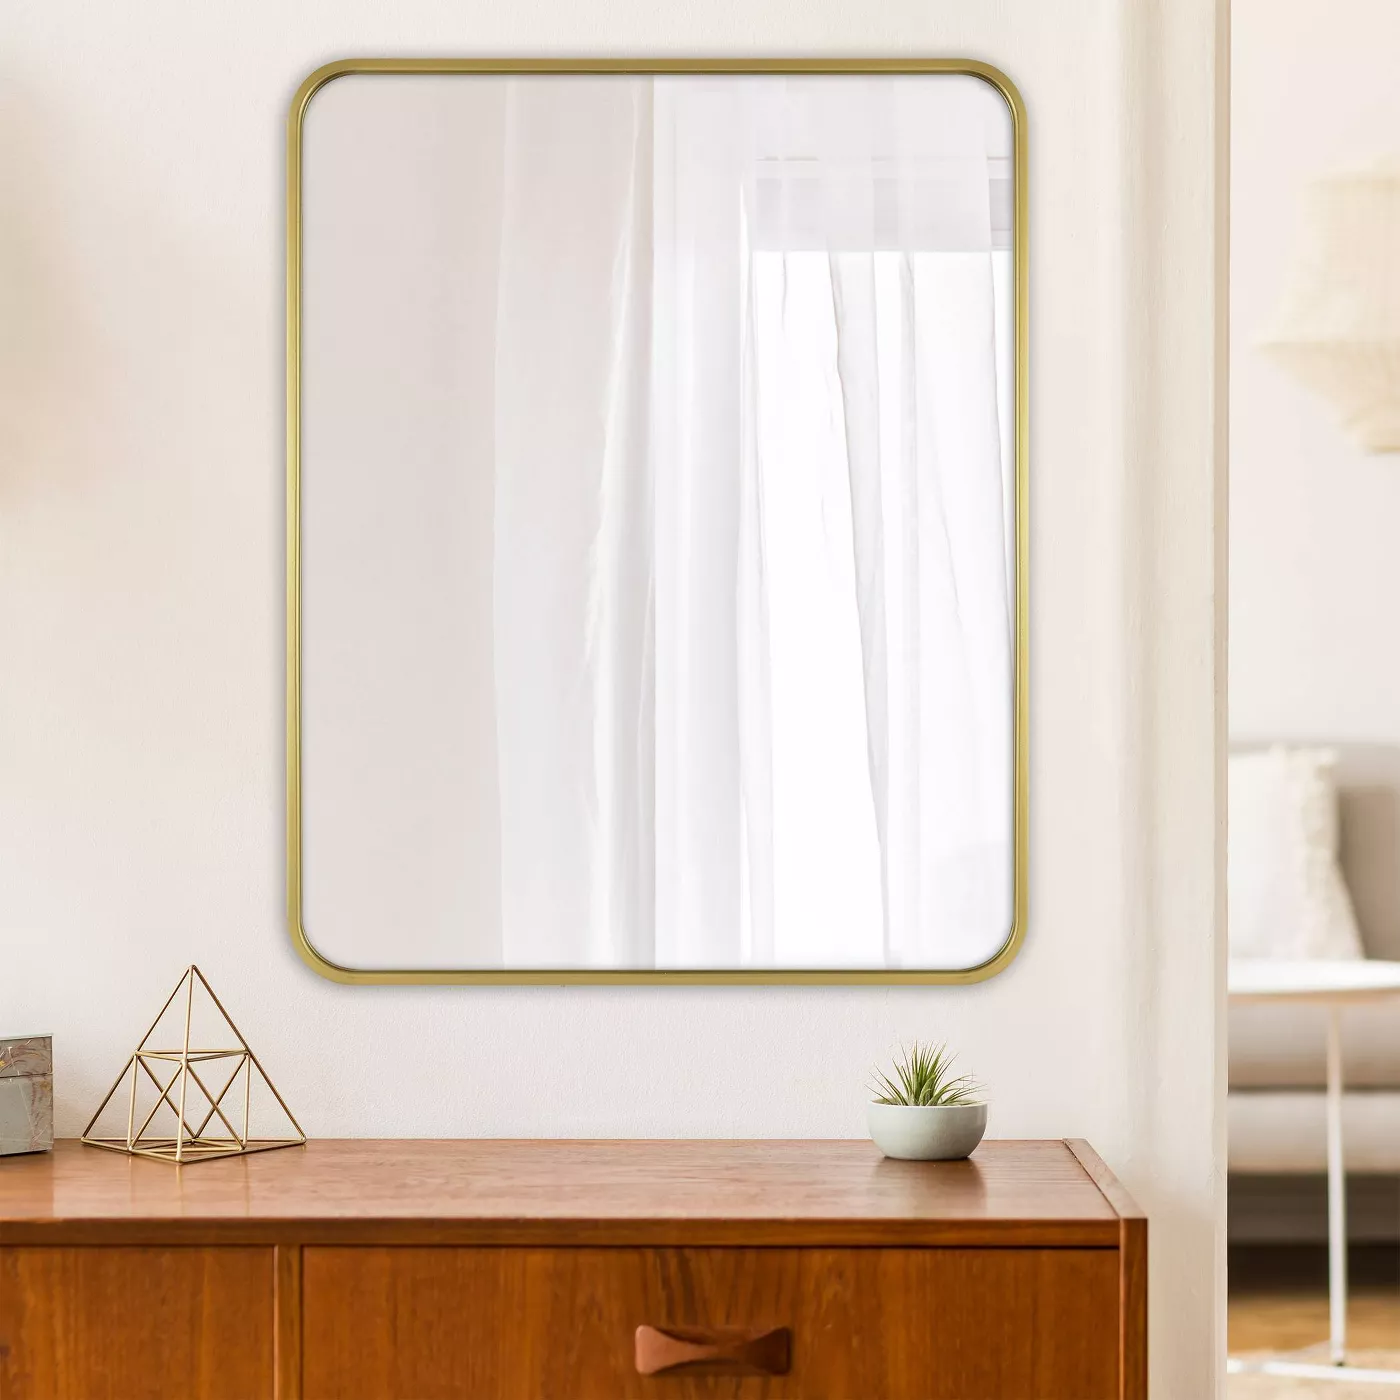 Shop Rectangular Decorative Wall Mirror with Rounded Corners from Target on Openhaus